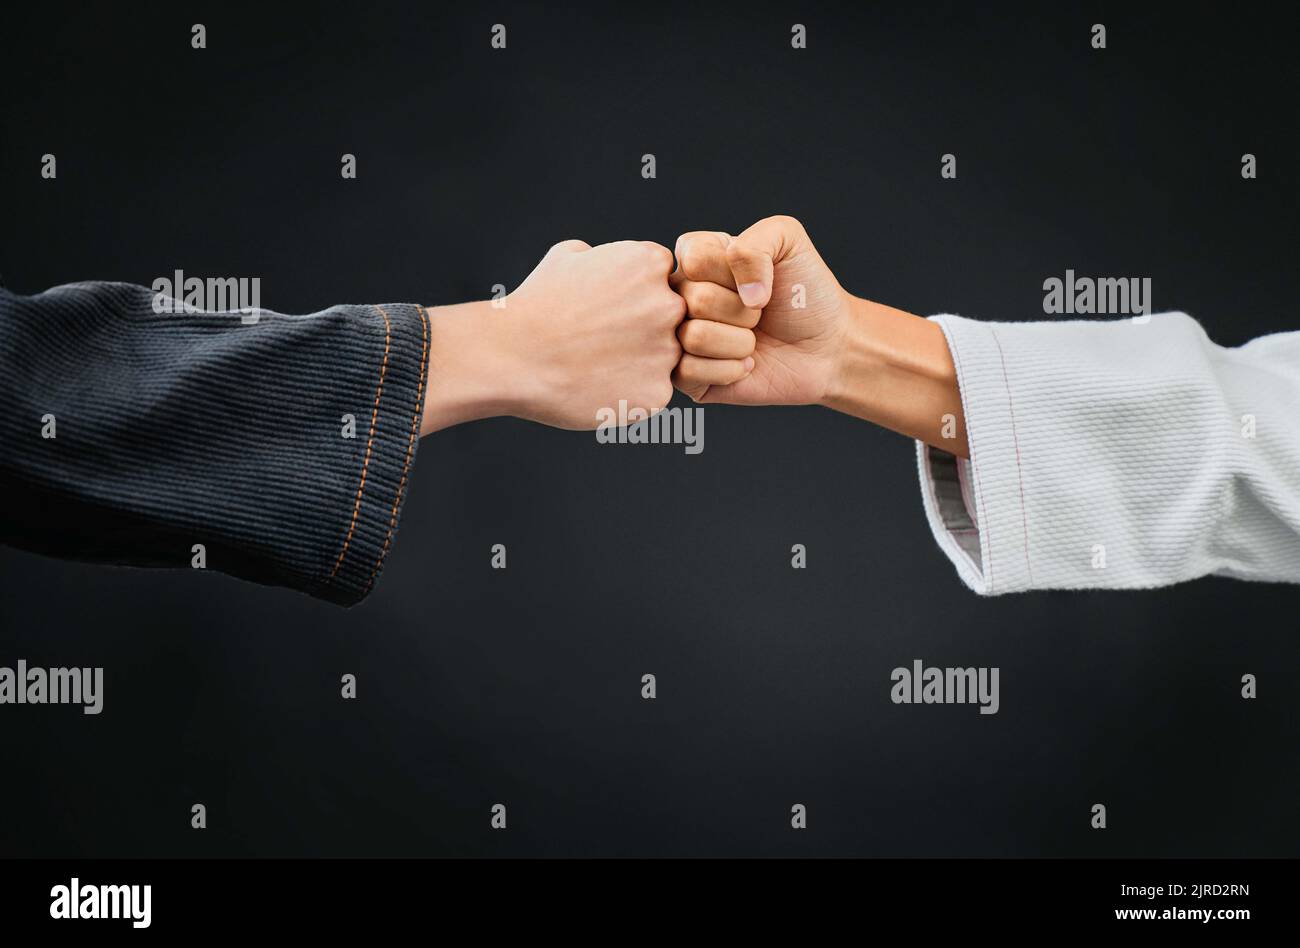 Teamwork, respect and discipline with hands fist bumping before a fight, match or mma competition. Closeup of two athletes greeting before combat Stock Photo